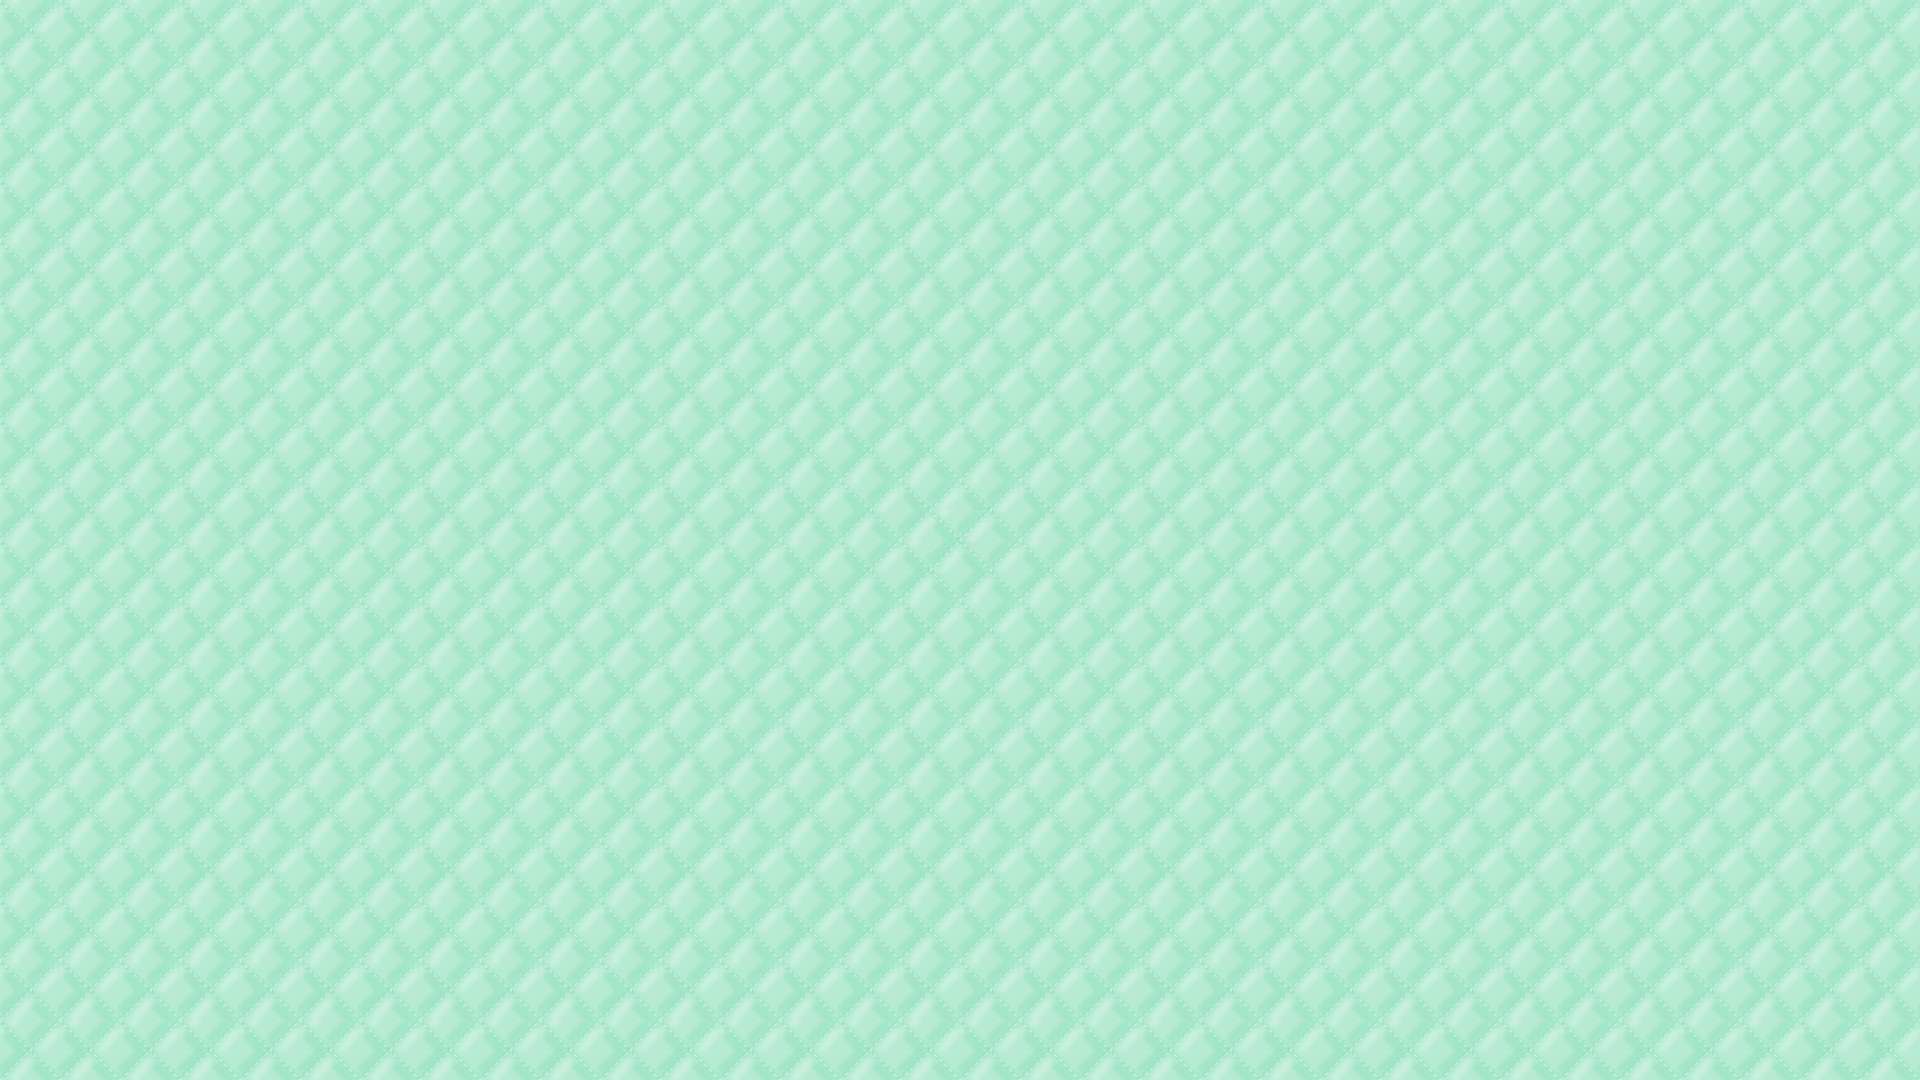 Mint Colored Wallpaper 52 Images